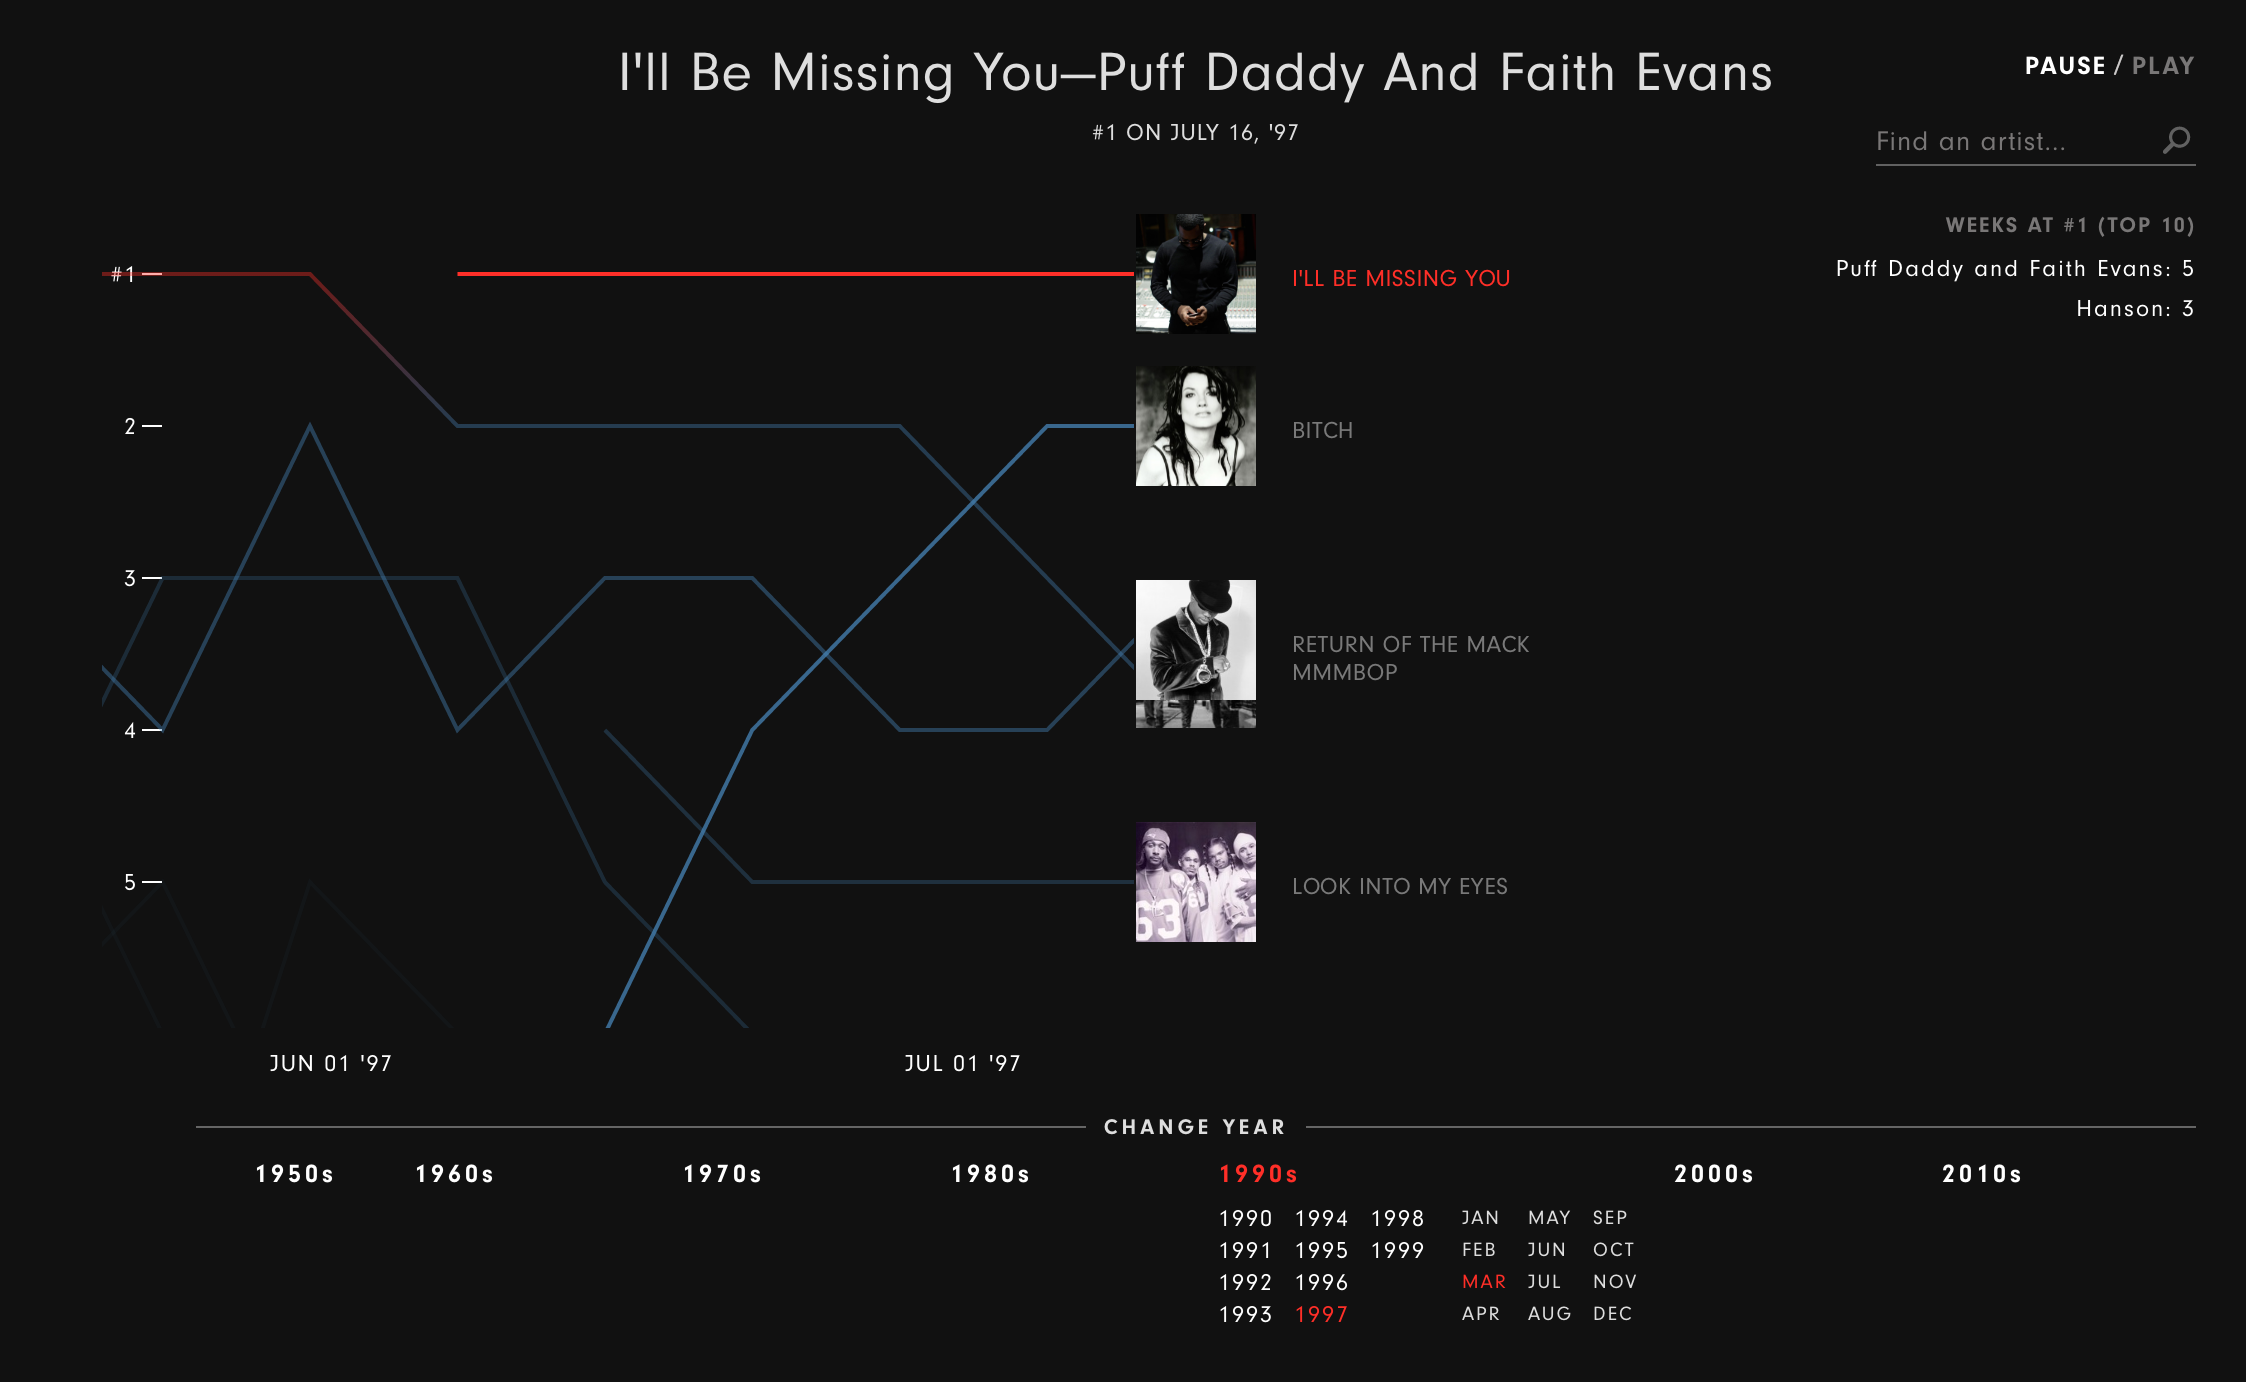 Music timeline plays through decades of top songs FlowingData